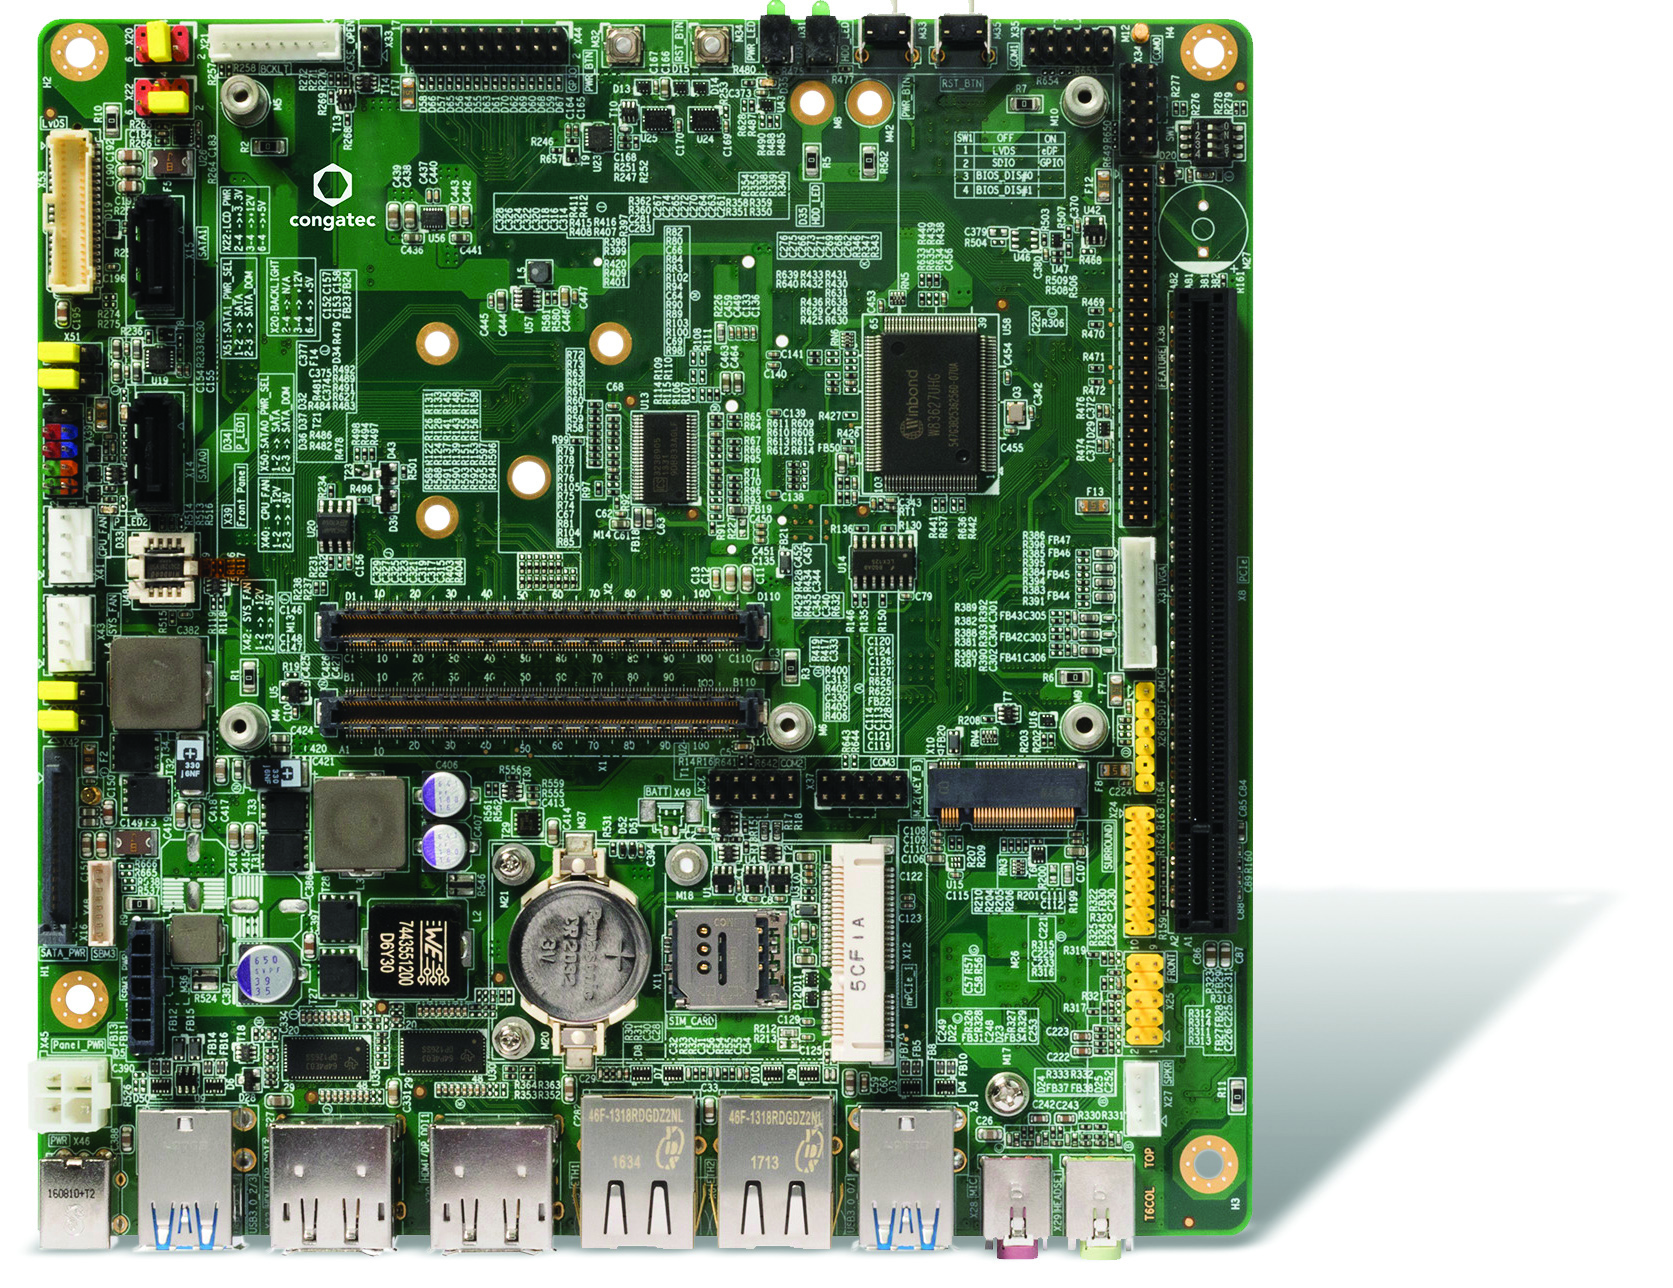 In Conversation With: Zeljko Loncaric of Congatec, on COM-HPC, maker boards and the Edge